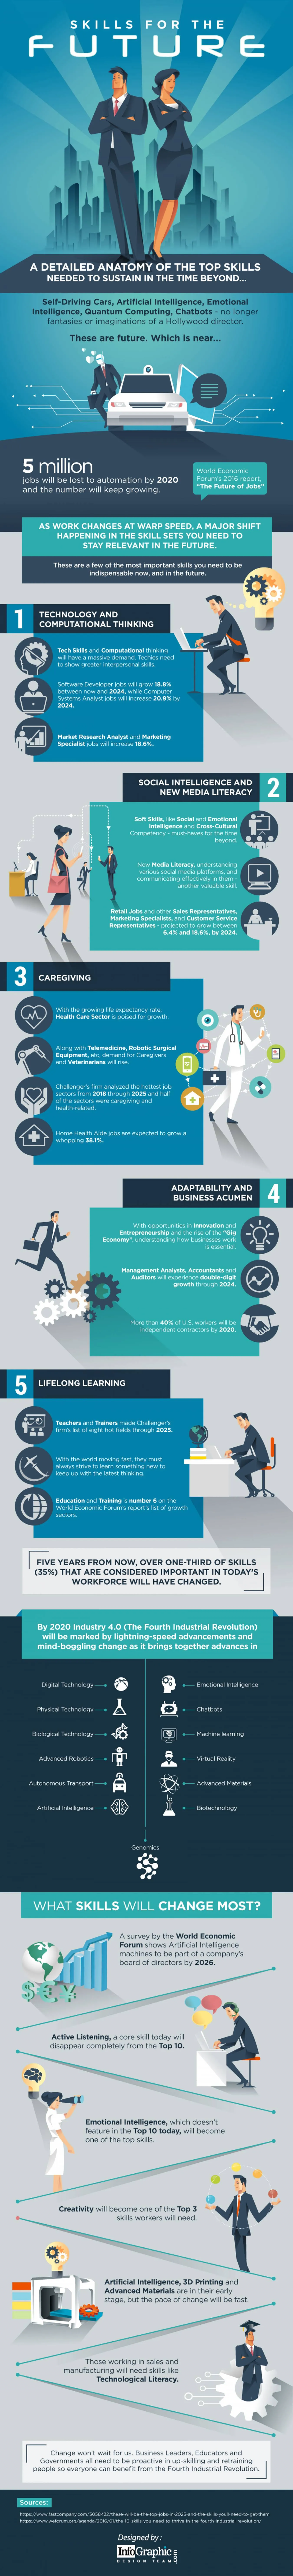 Skills for the Future #infographic